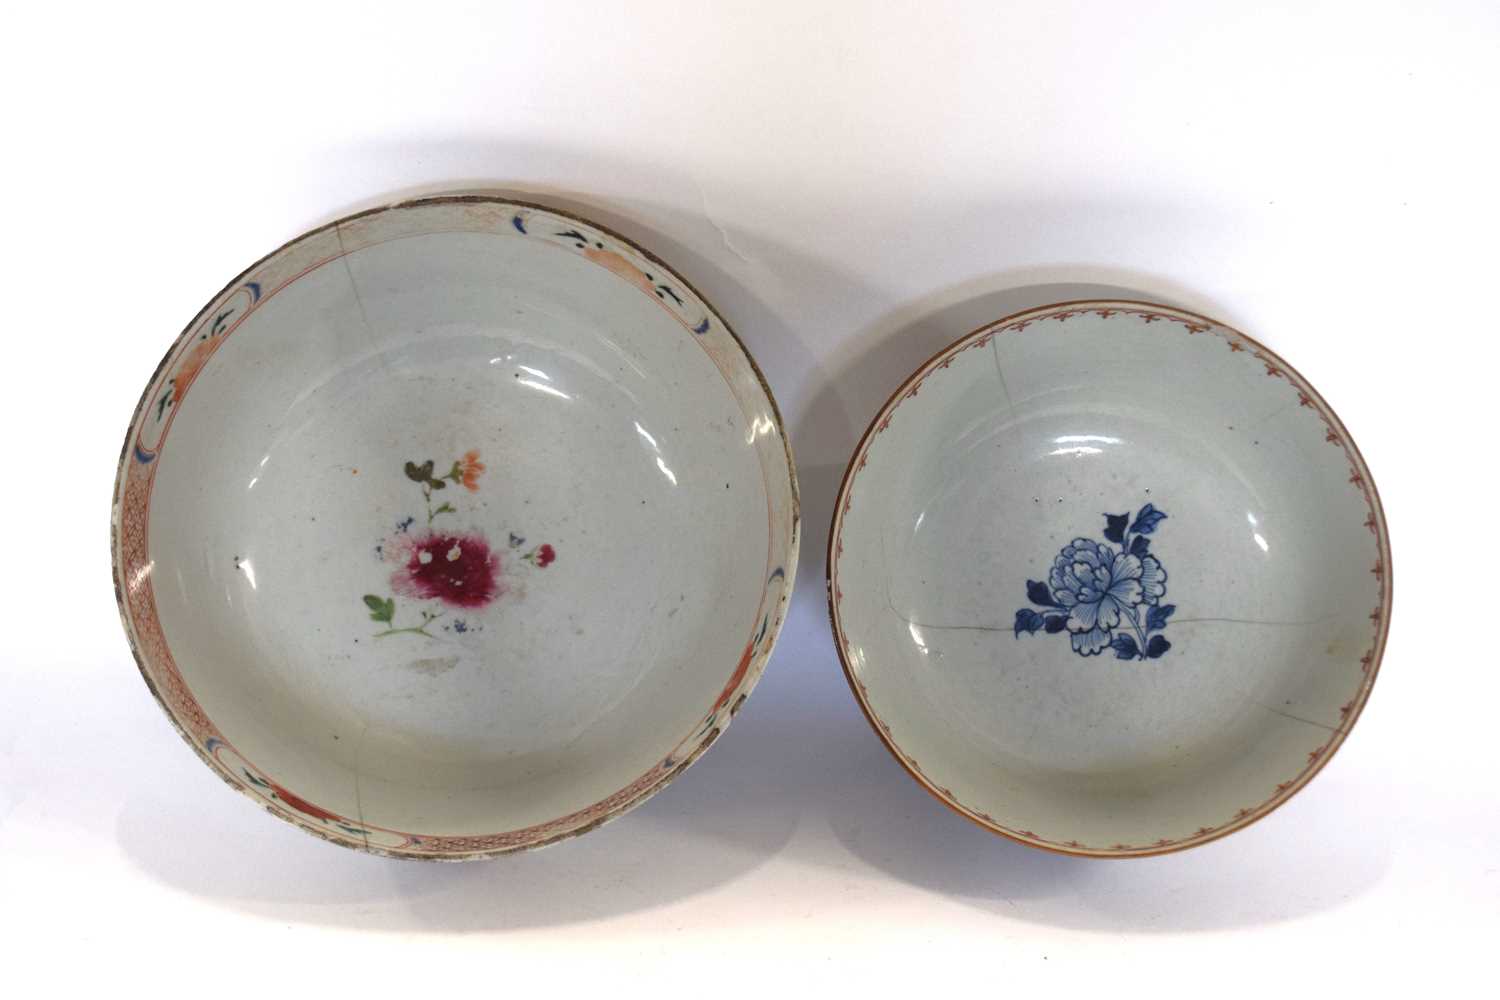 Two 18th Century Chinese porcelain bowls, both with floral designs (both a/f)